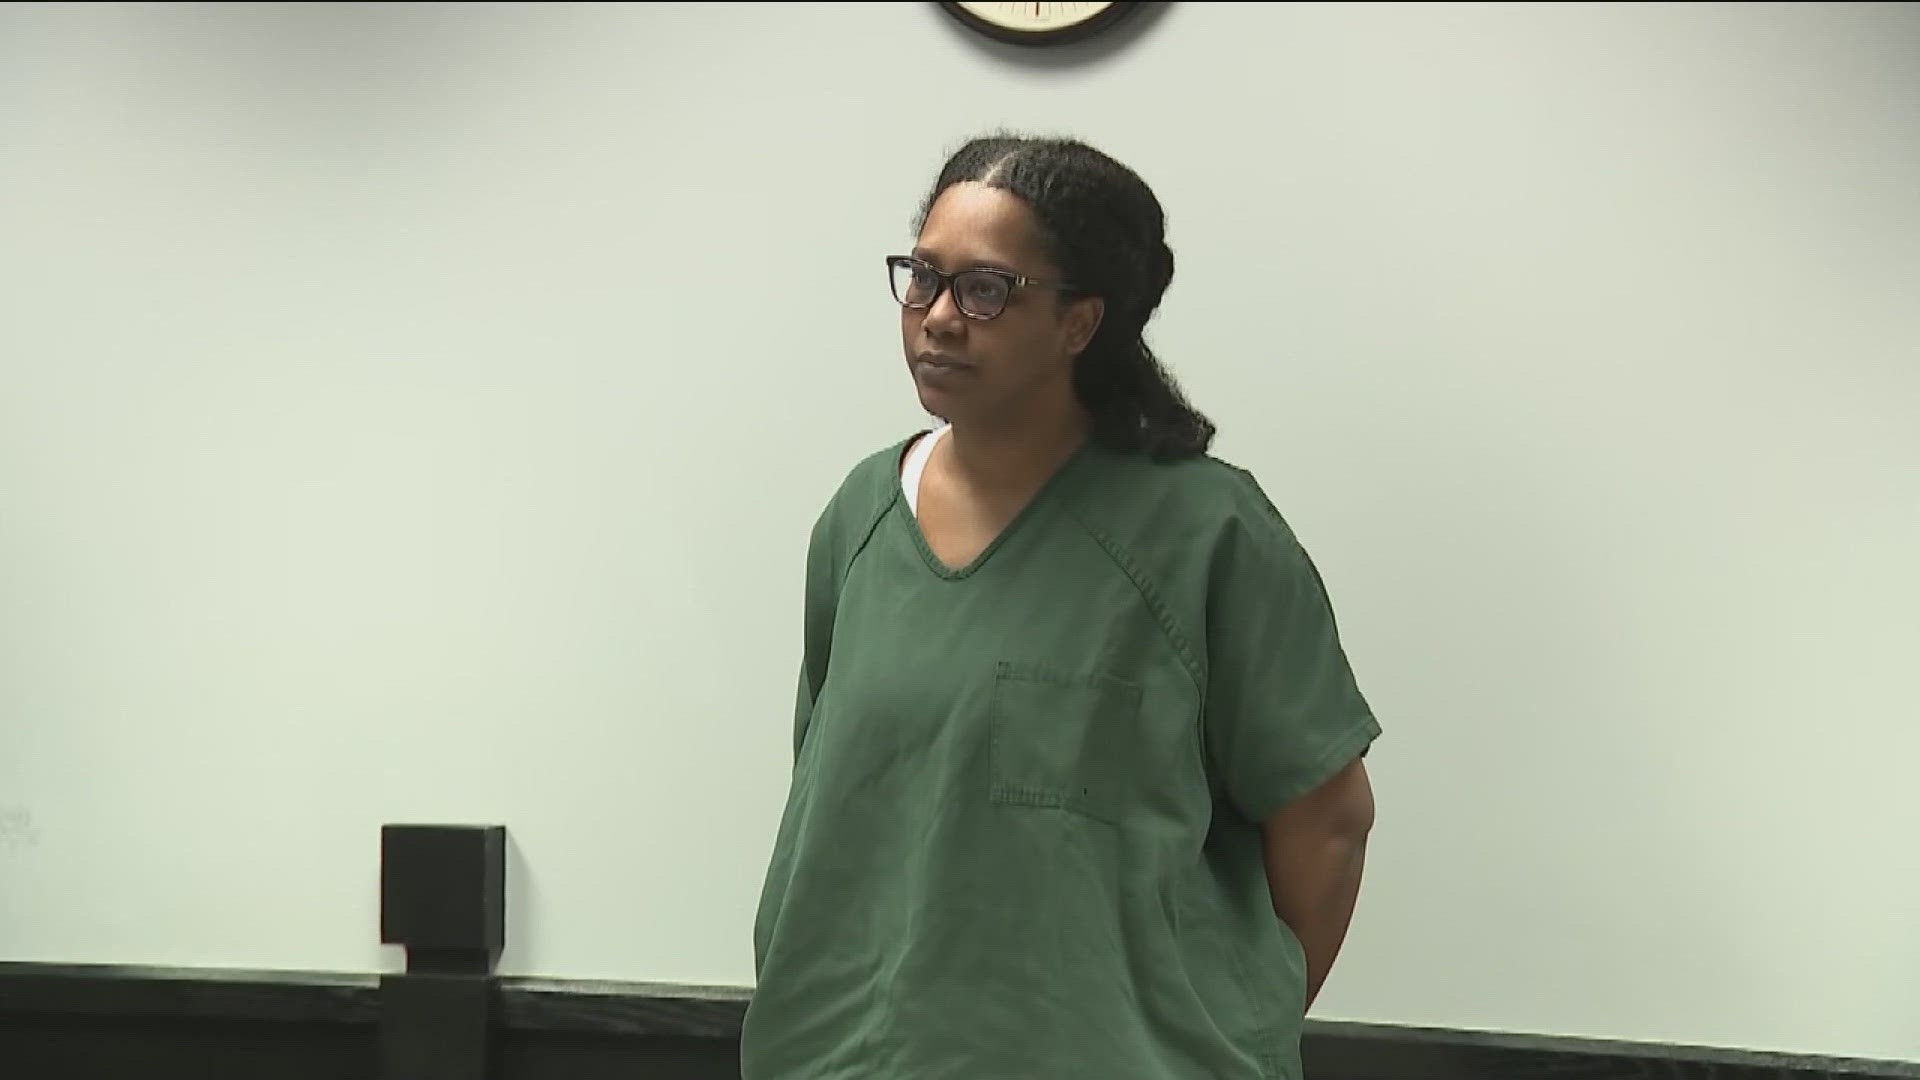 ​Natiela Barros, 34, faces charges including malice murder, felony murder, aggravated assault and first-degree child cruelty in the death of the girl on Tuesday.